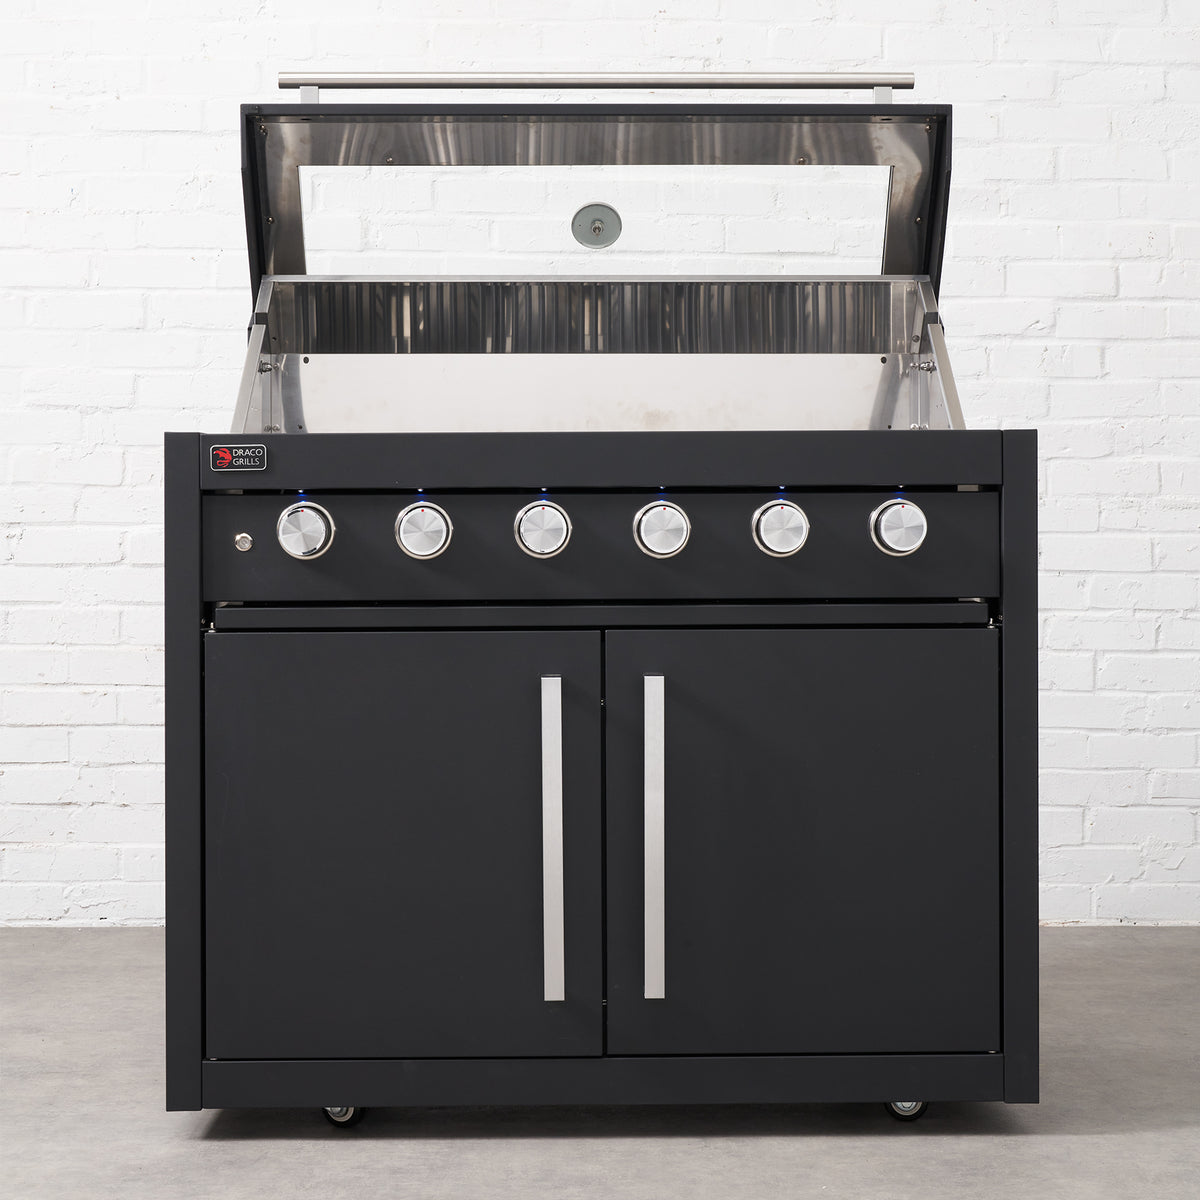 Draco Grills Fusion 6 Burner Black Outdoor Kitchen with Modular Sink